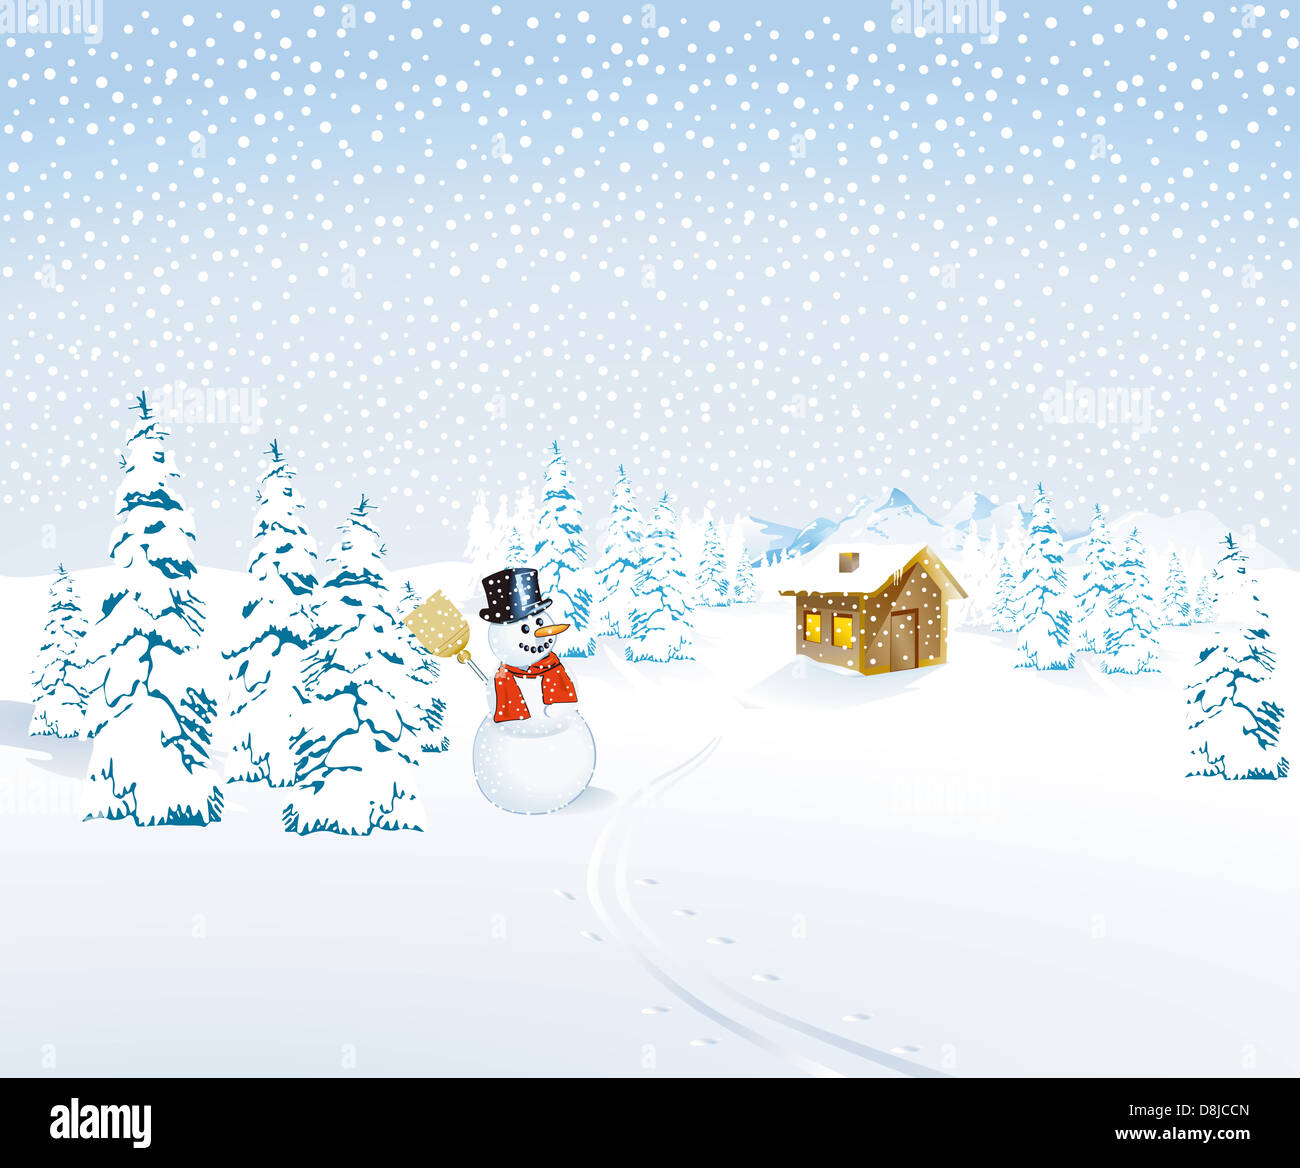 Winter landscape with snowman and Mountain Cottage Stock Photo